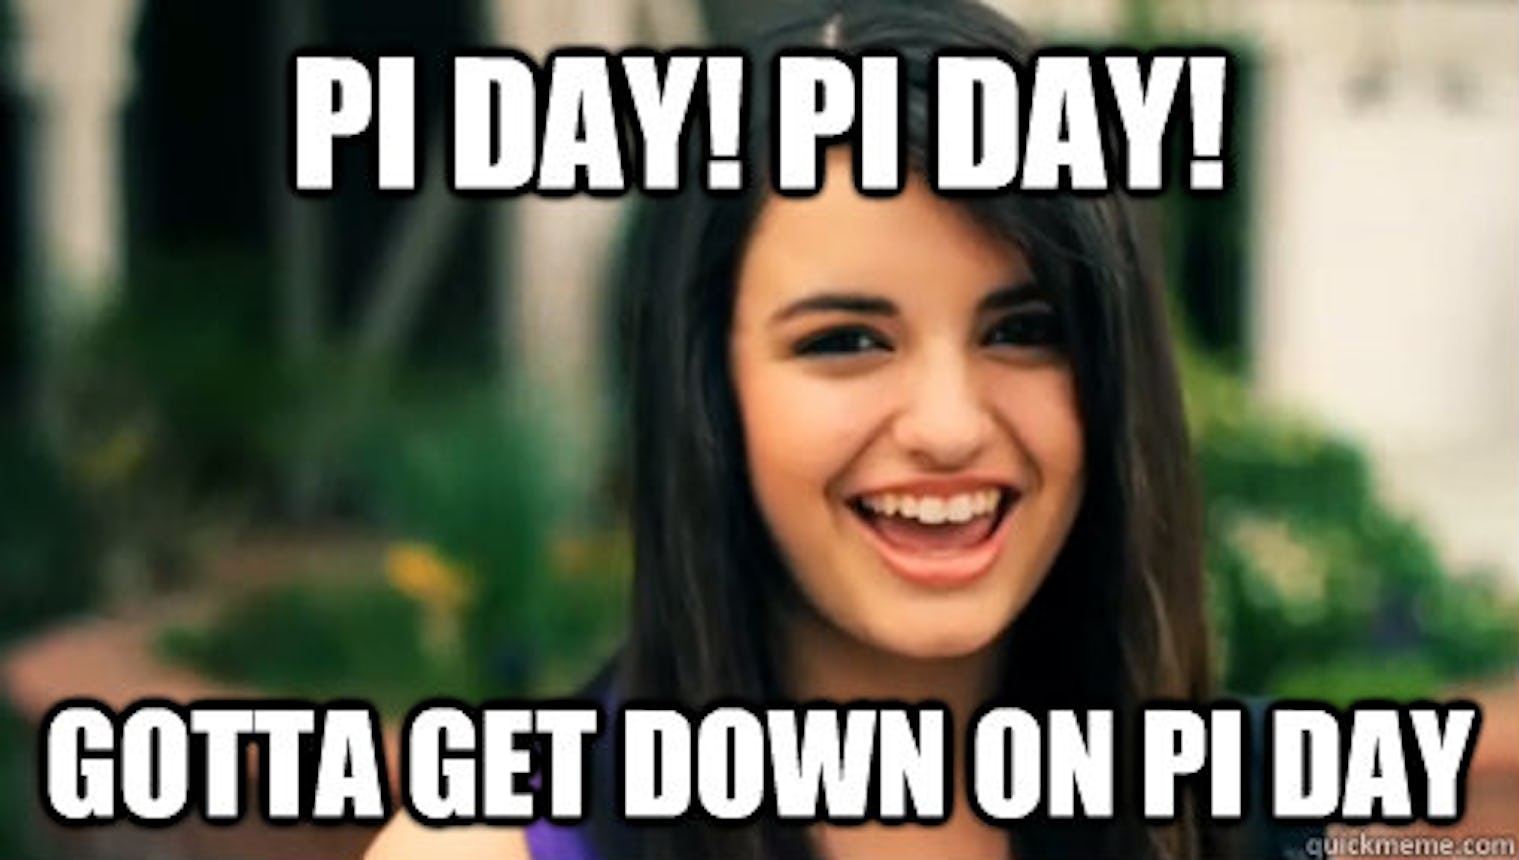 10 National Pi Day Memes And GIFs For Nerds And Foodies Alike